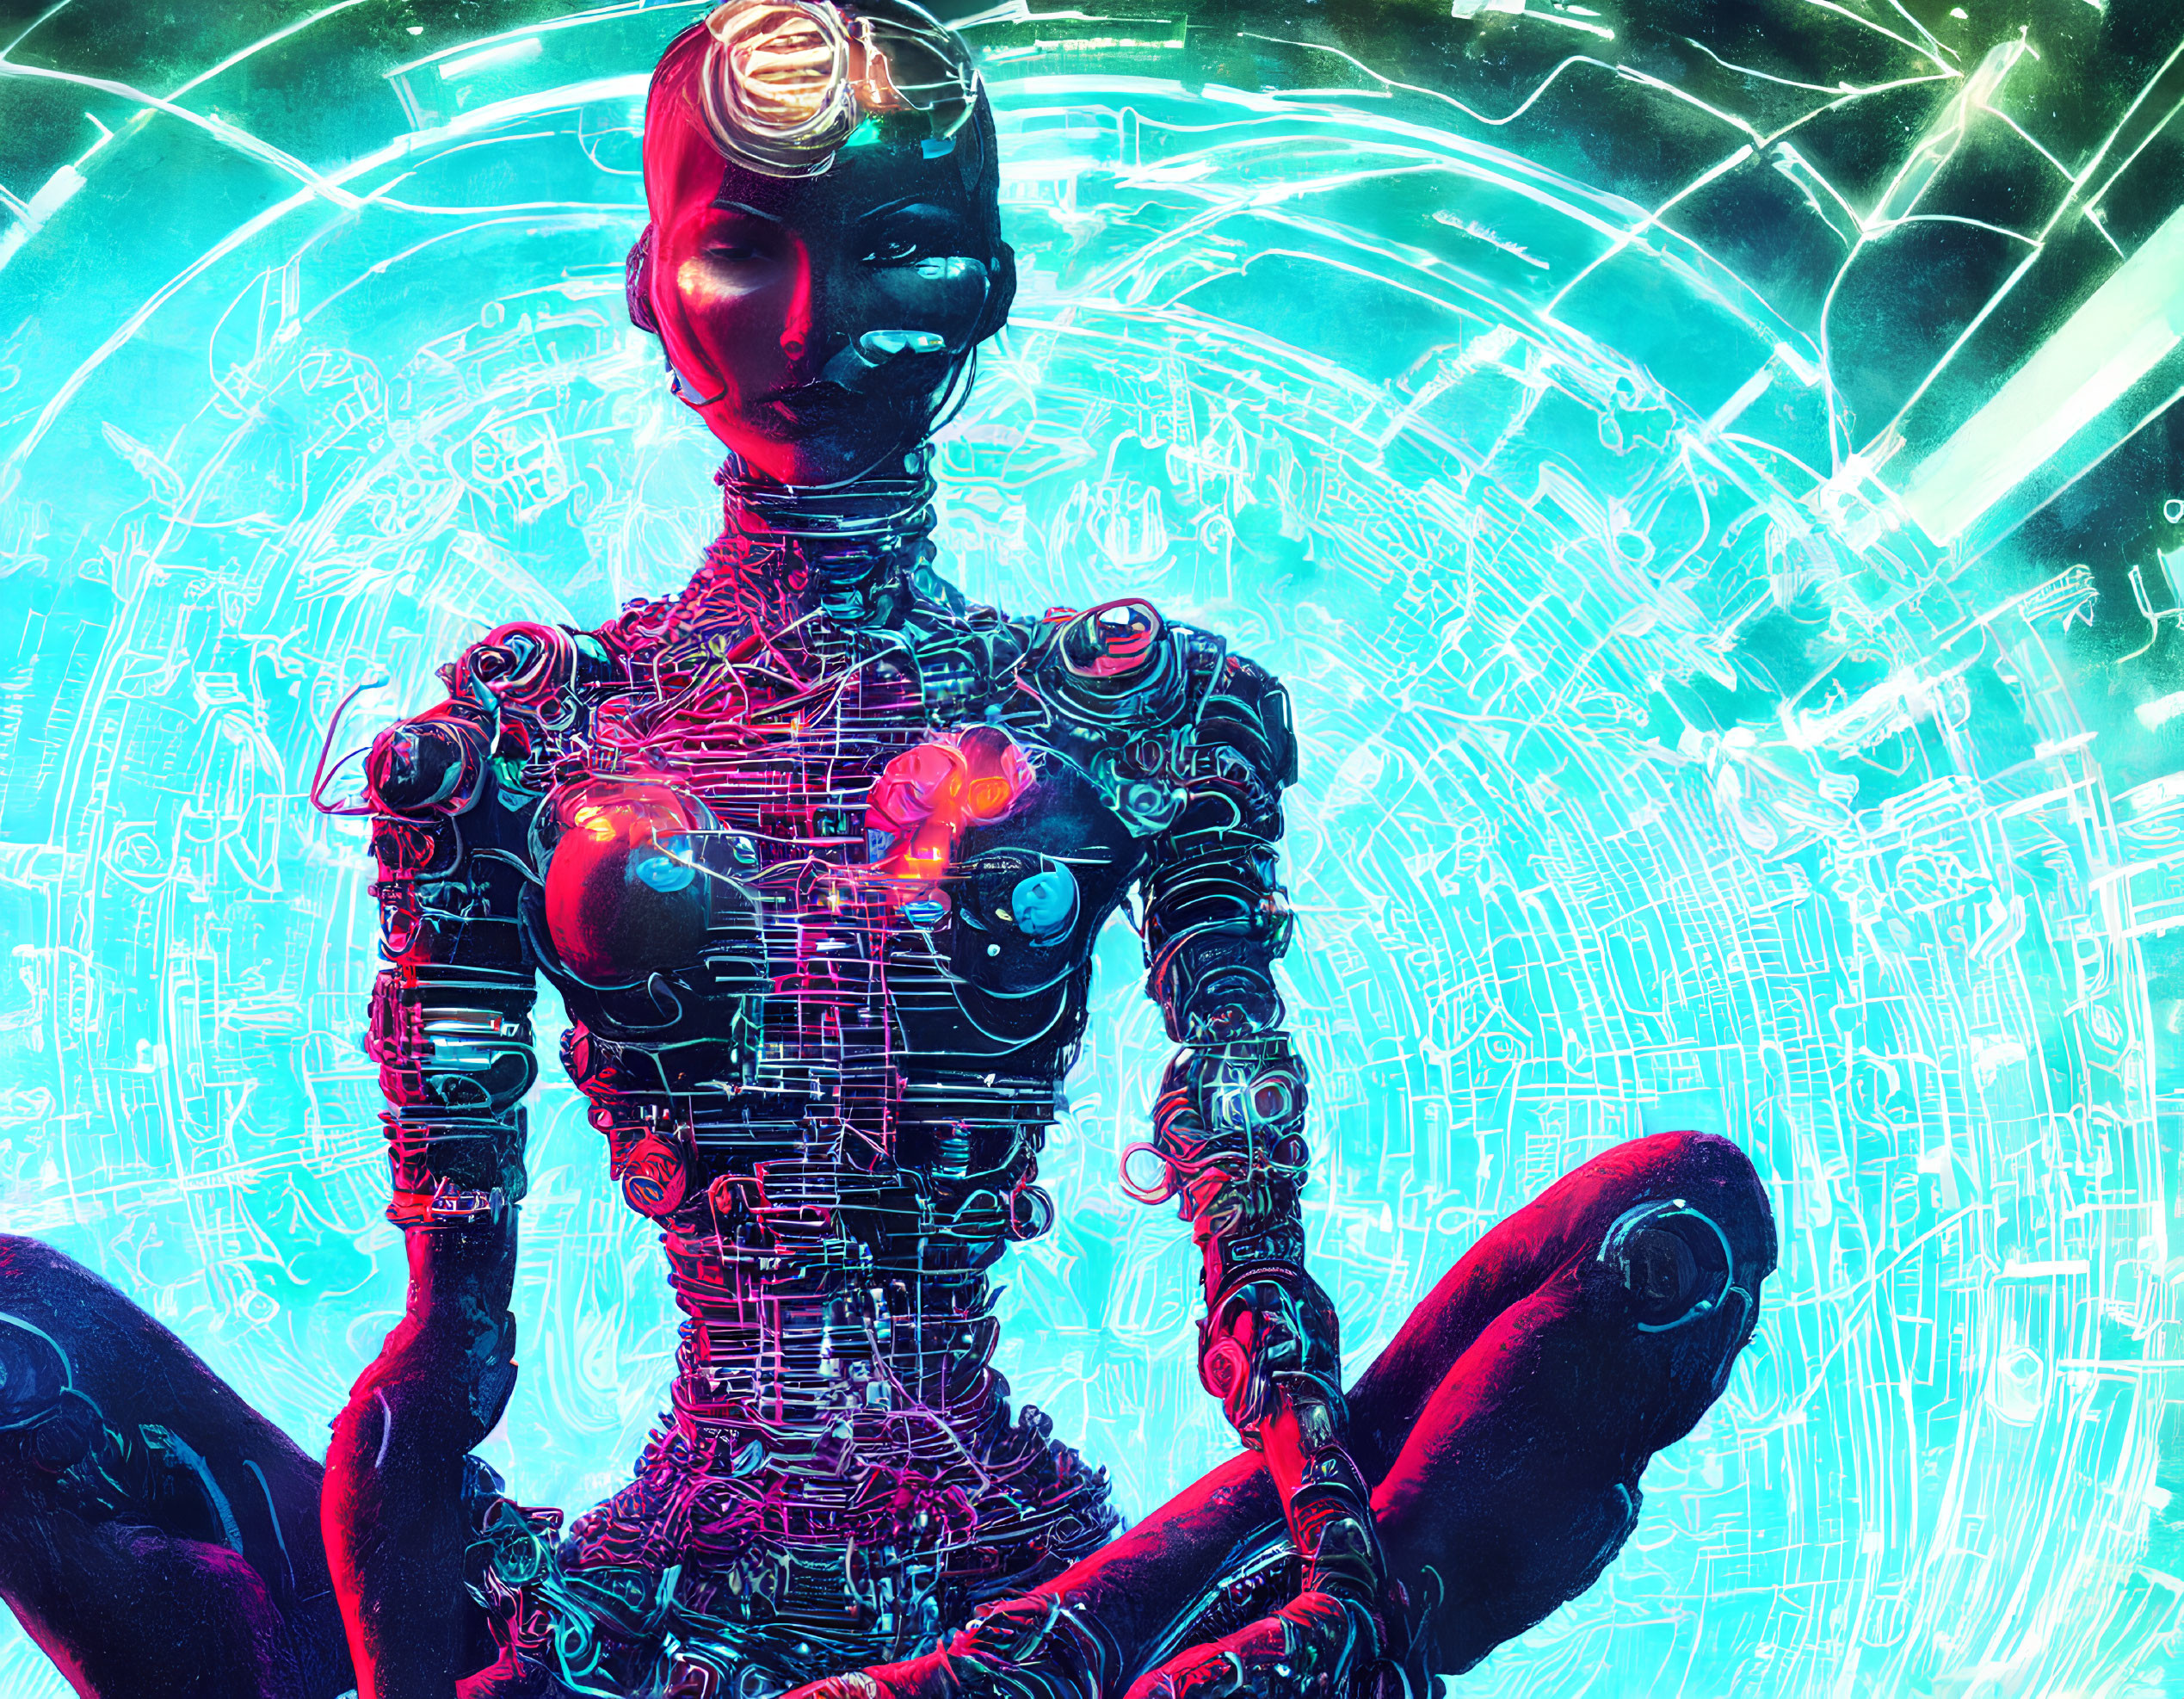 Cybernetic being with glowing red heart in intricate wiring against vibrant technologic backdrop